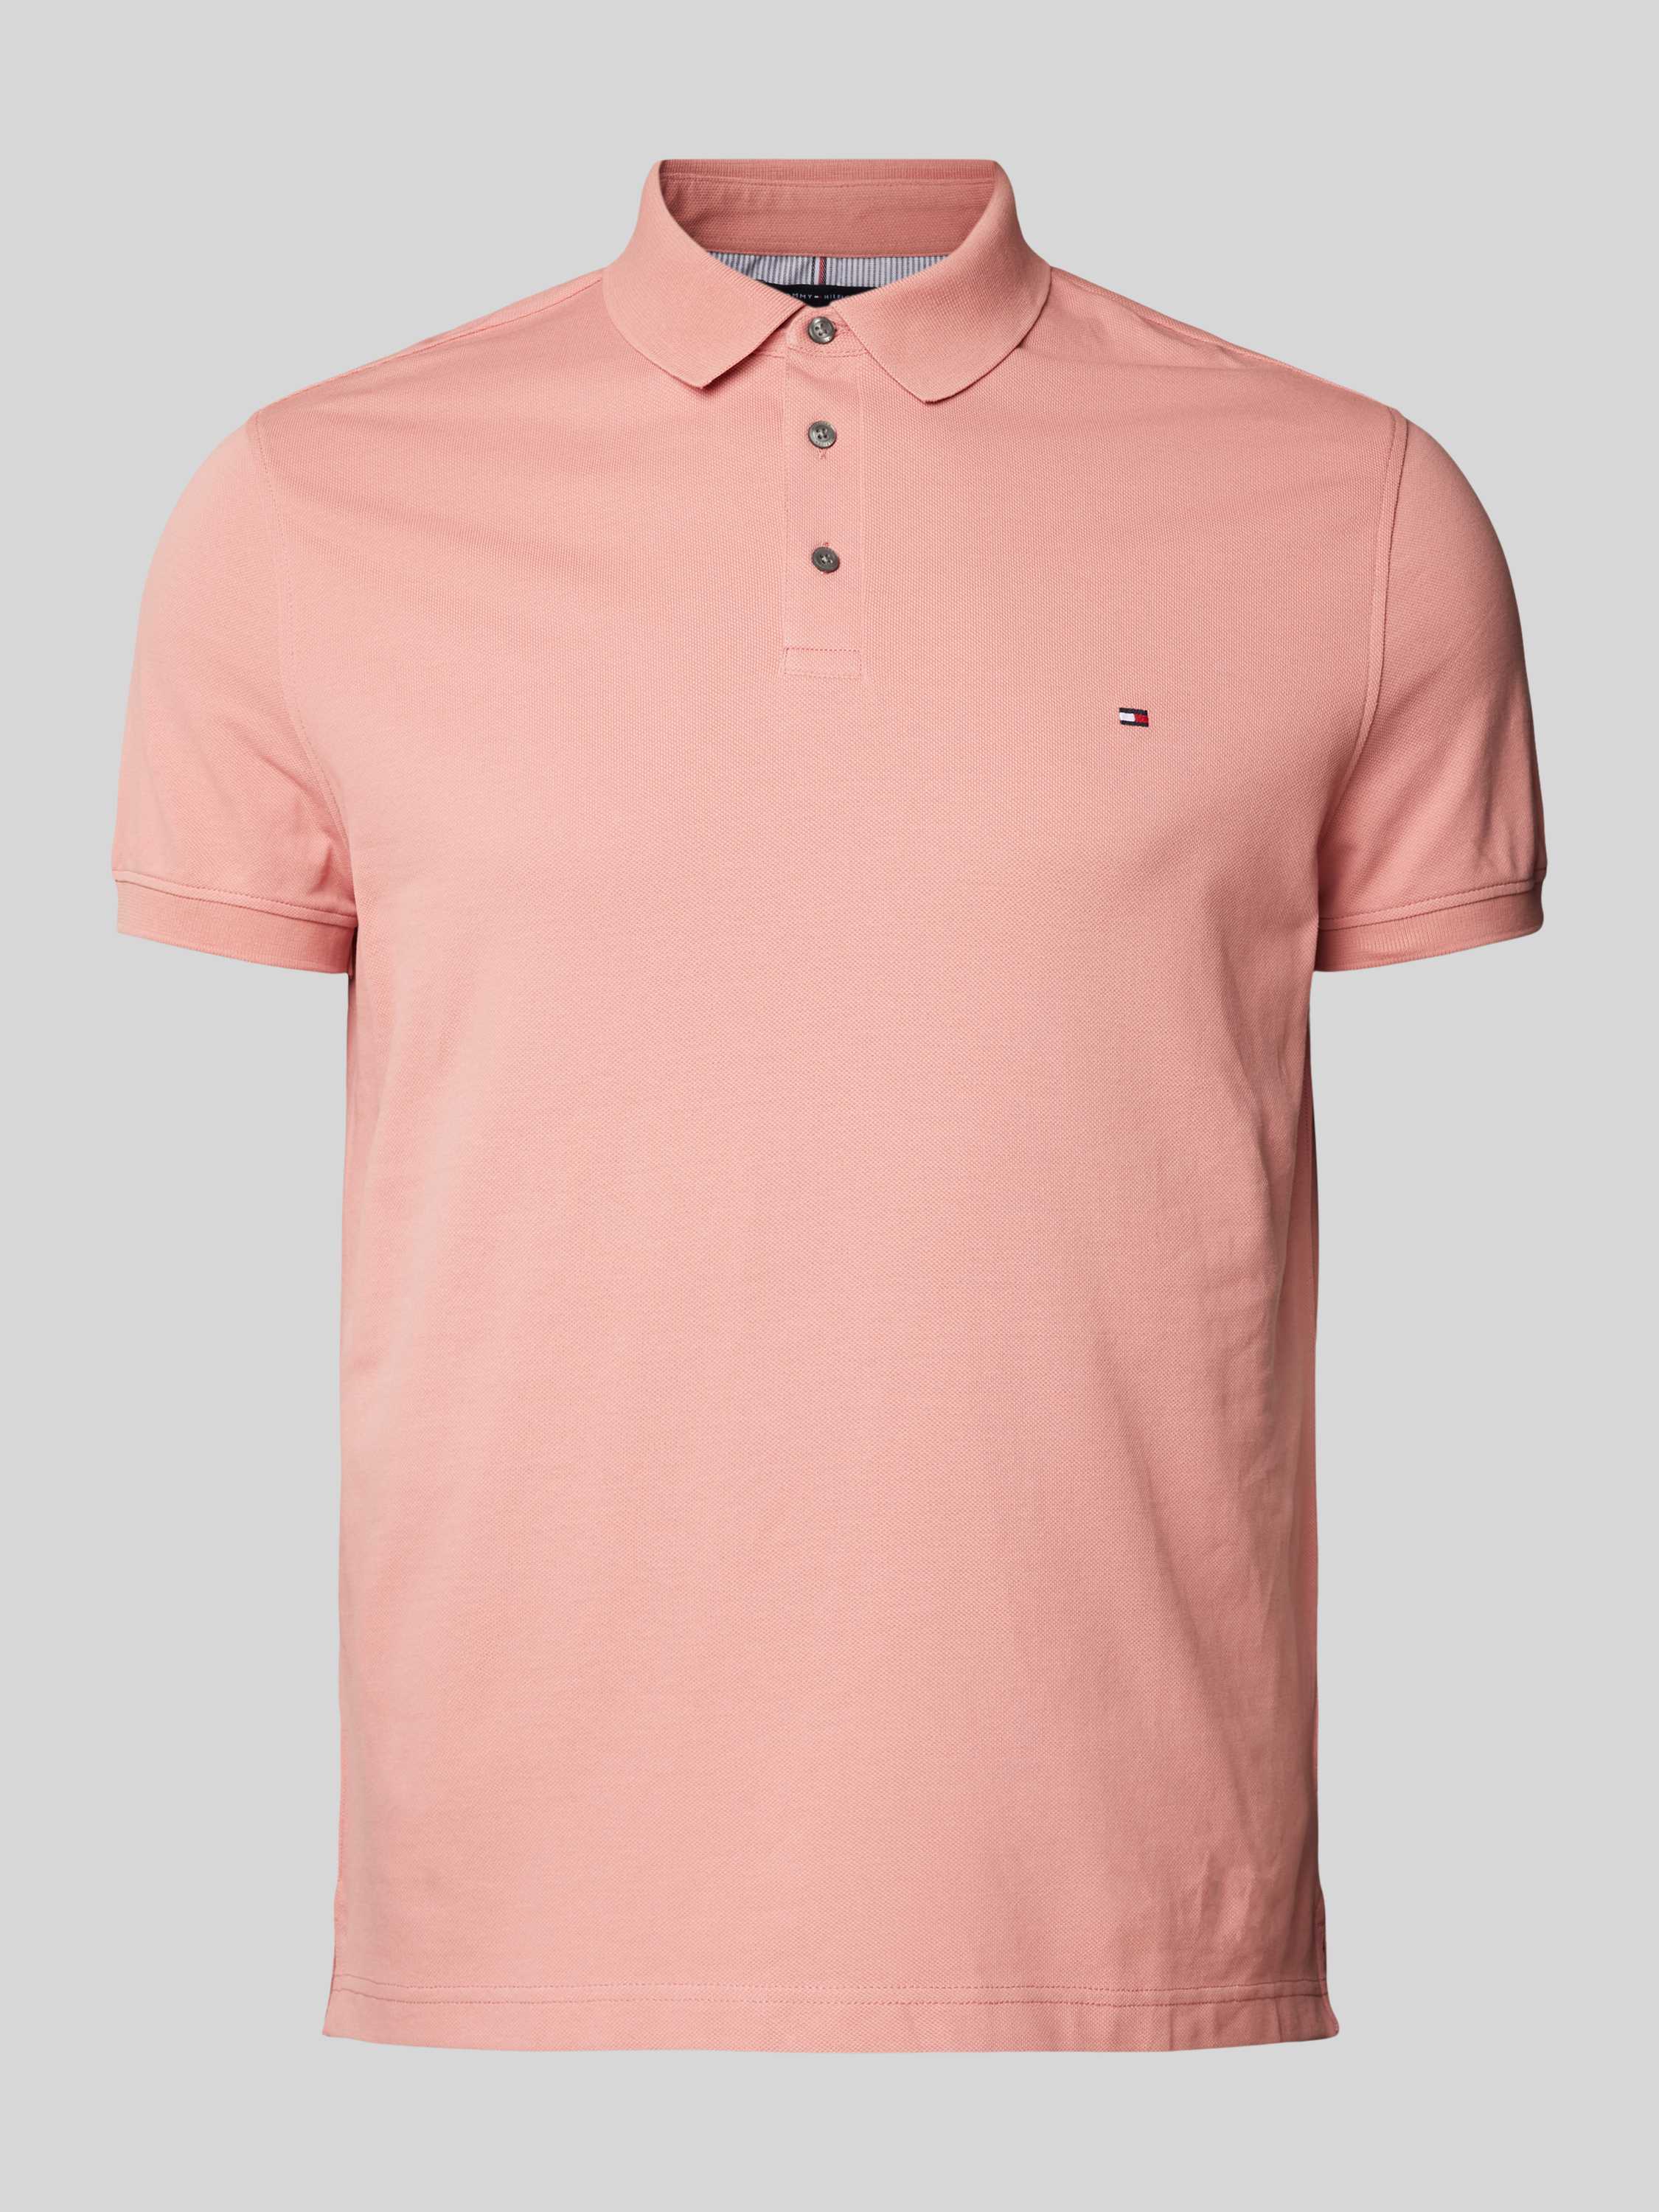 Tommy Hilfiger Heren Polo T-shirts 1985 Slim Polo Pink Heren